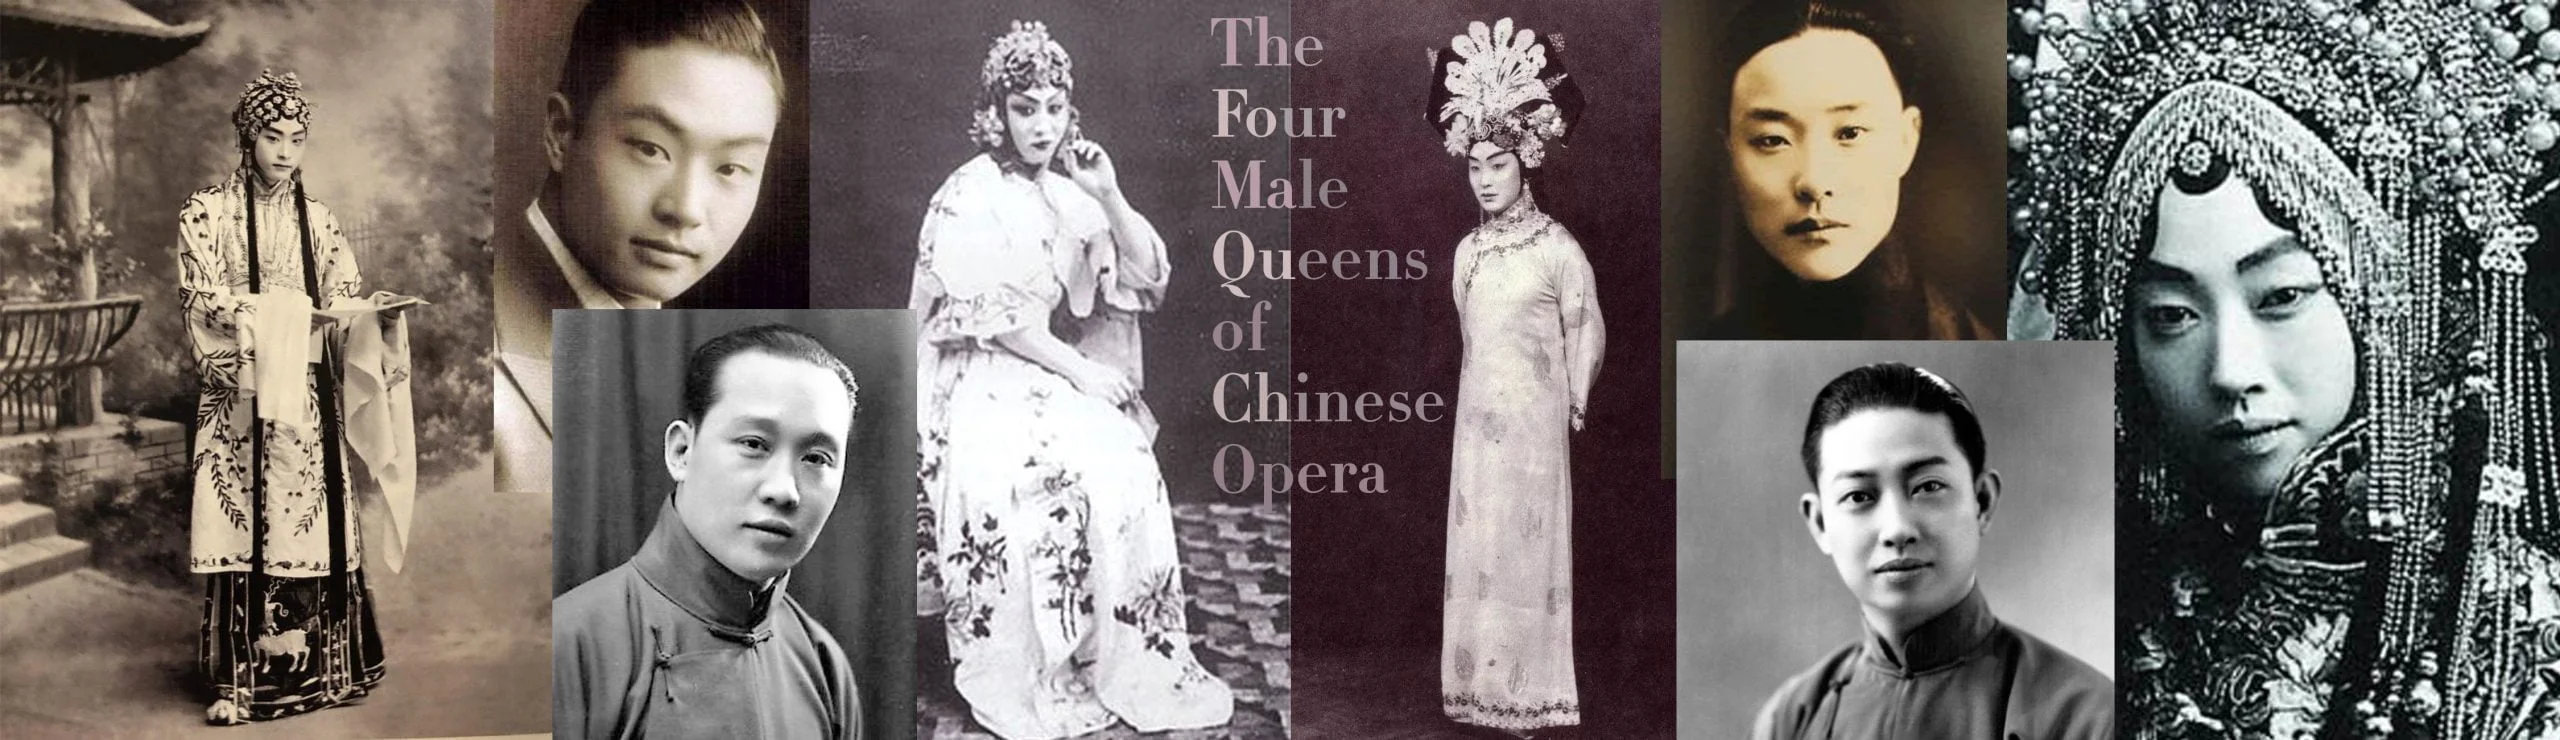 The 4 Male Queens of Chinese Opera